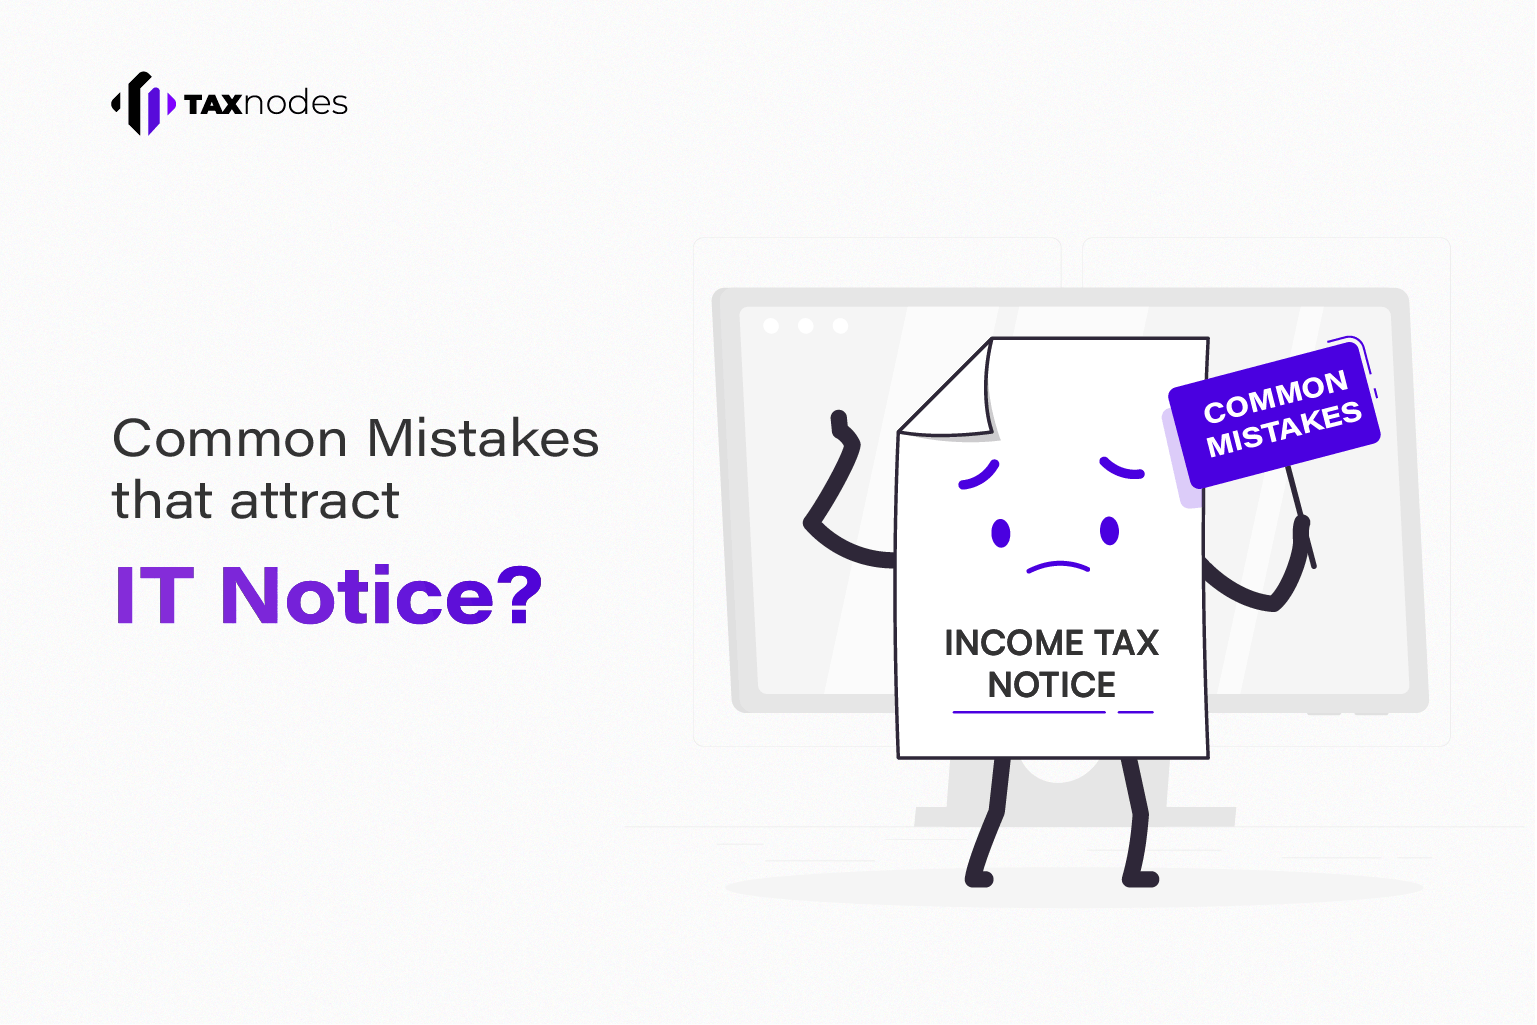 Mistakes that attract income tax notice